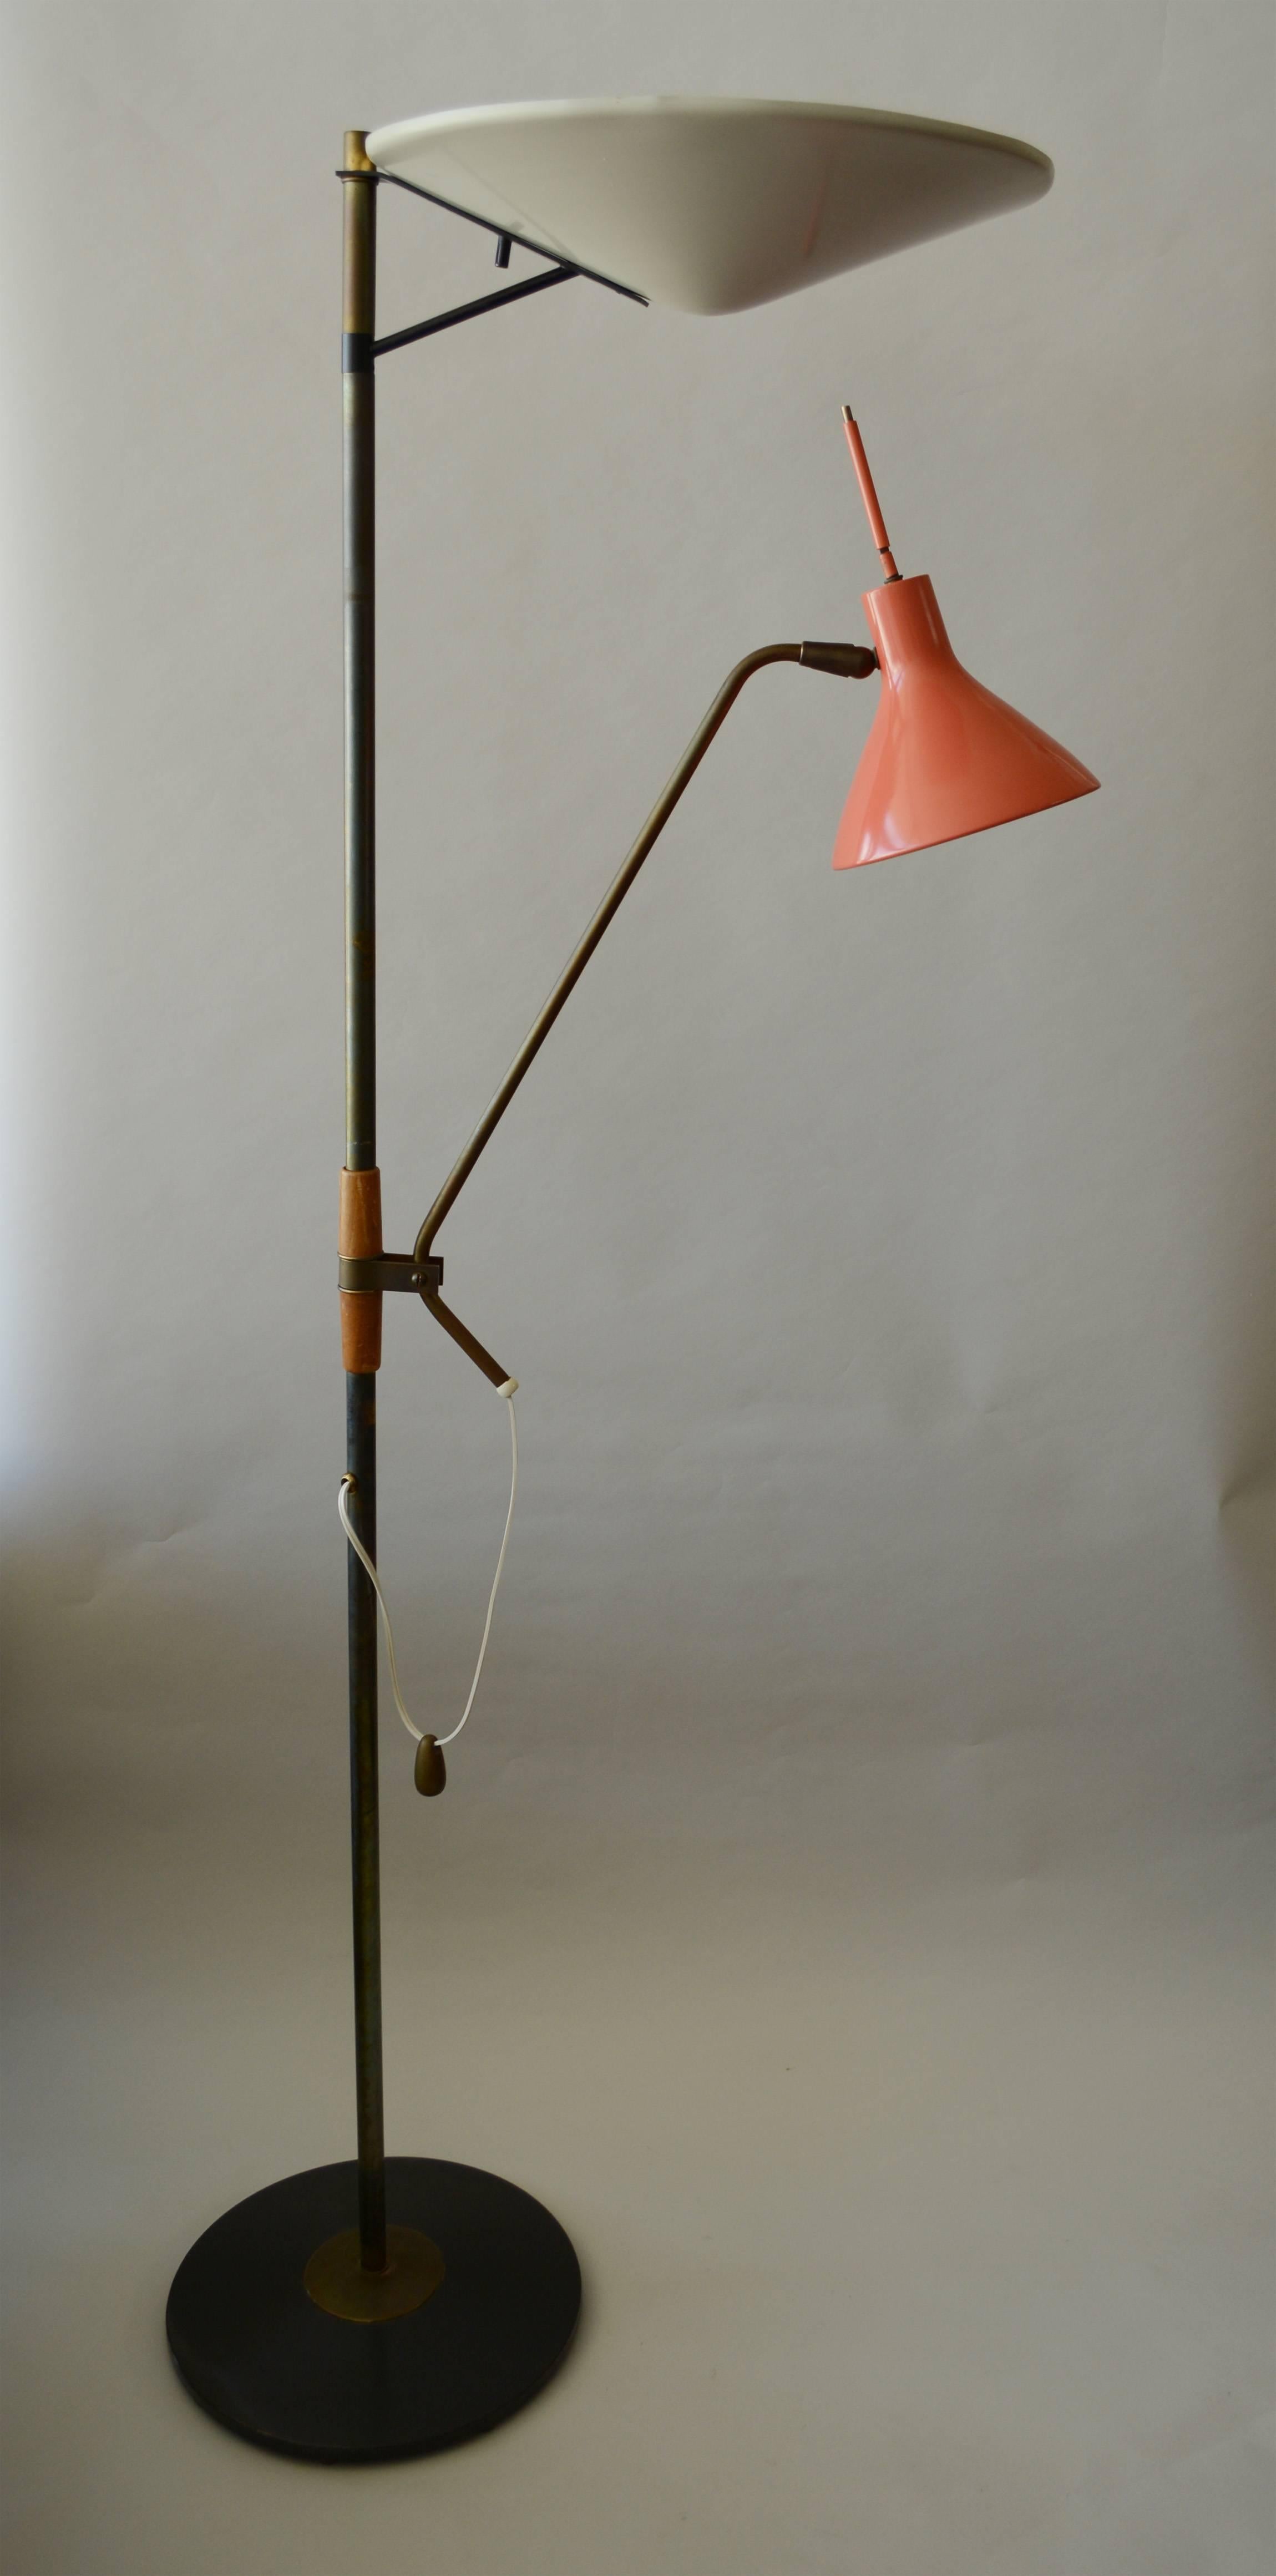 This versatile floor lamp designed by Gerald Thurston has an upward reflector and an adjustable reading lamp. The lamp was manufactured by Lightolier. The brass has a dark patina. The wood on the column shows some wear and has a crack in it.